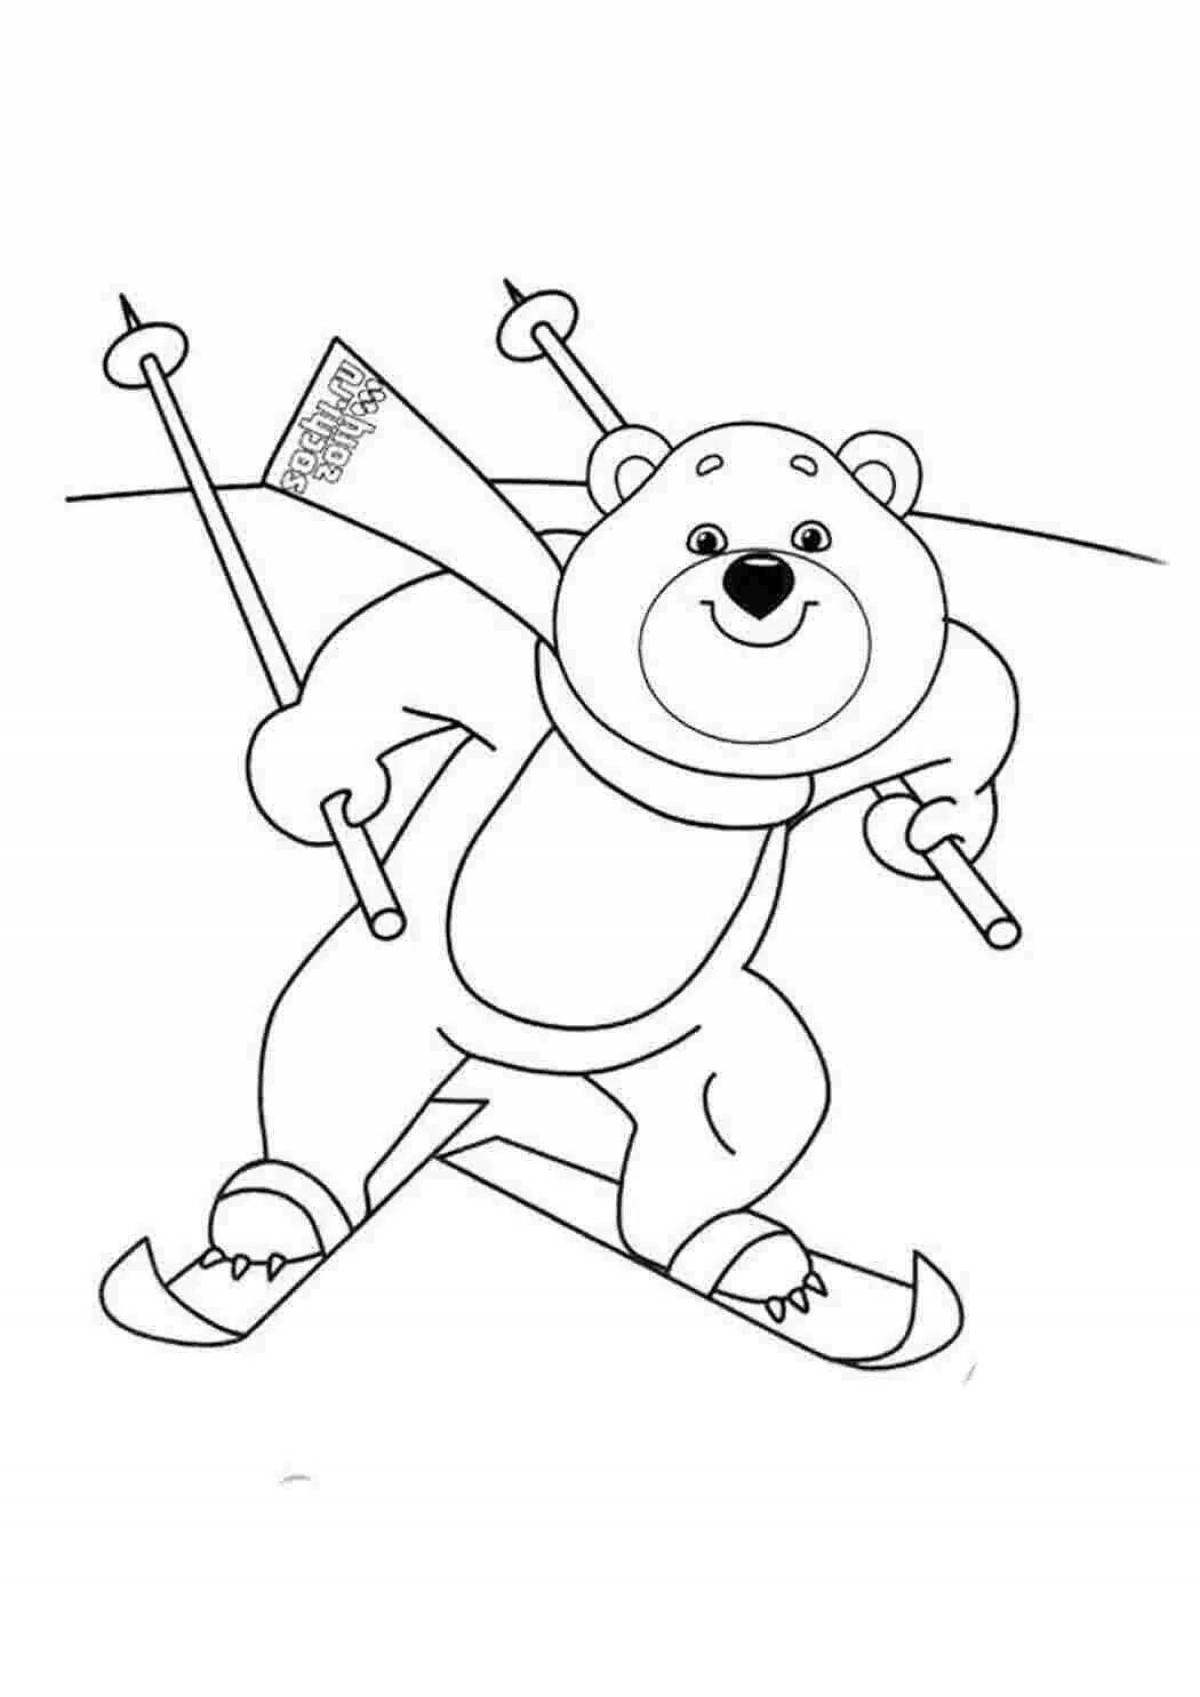 Coloring book gorgeous winter olympics